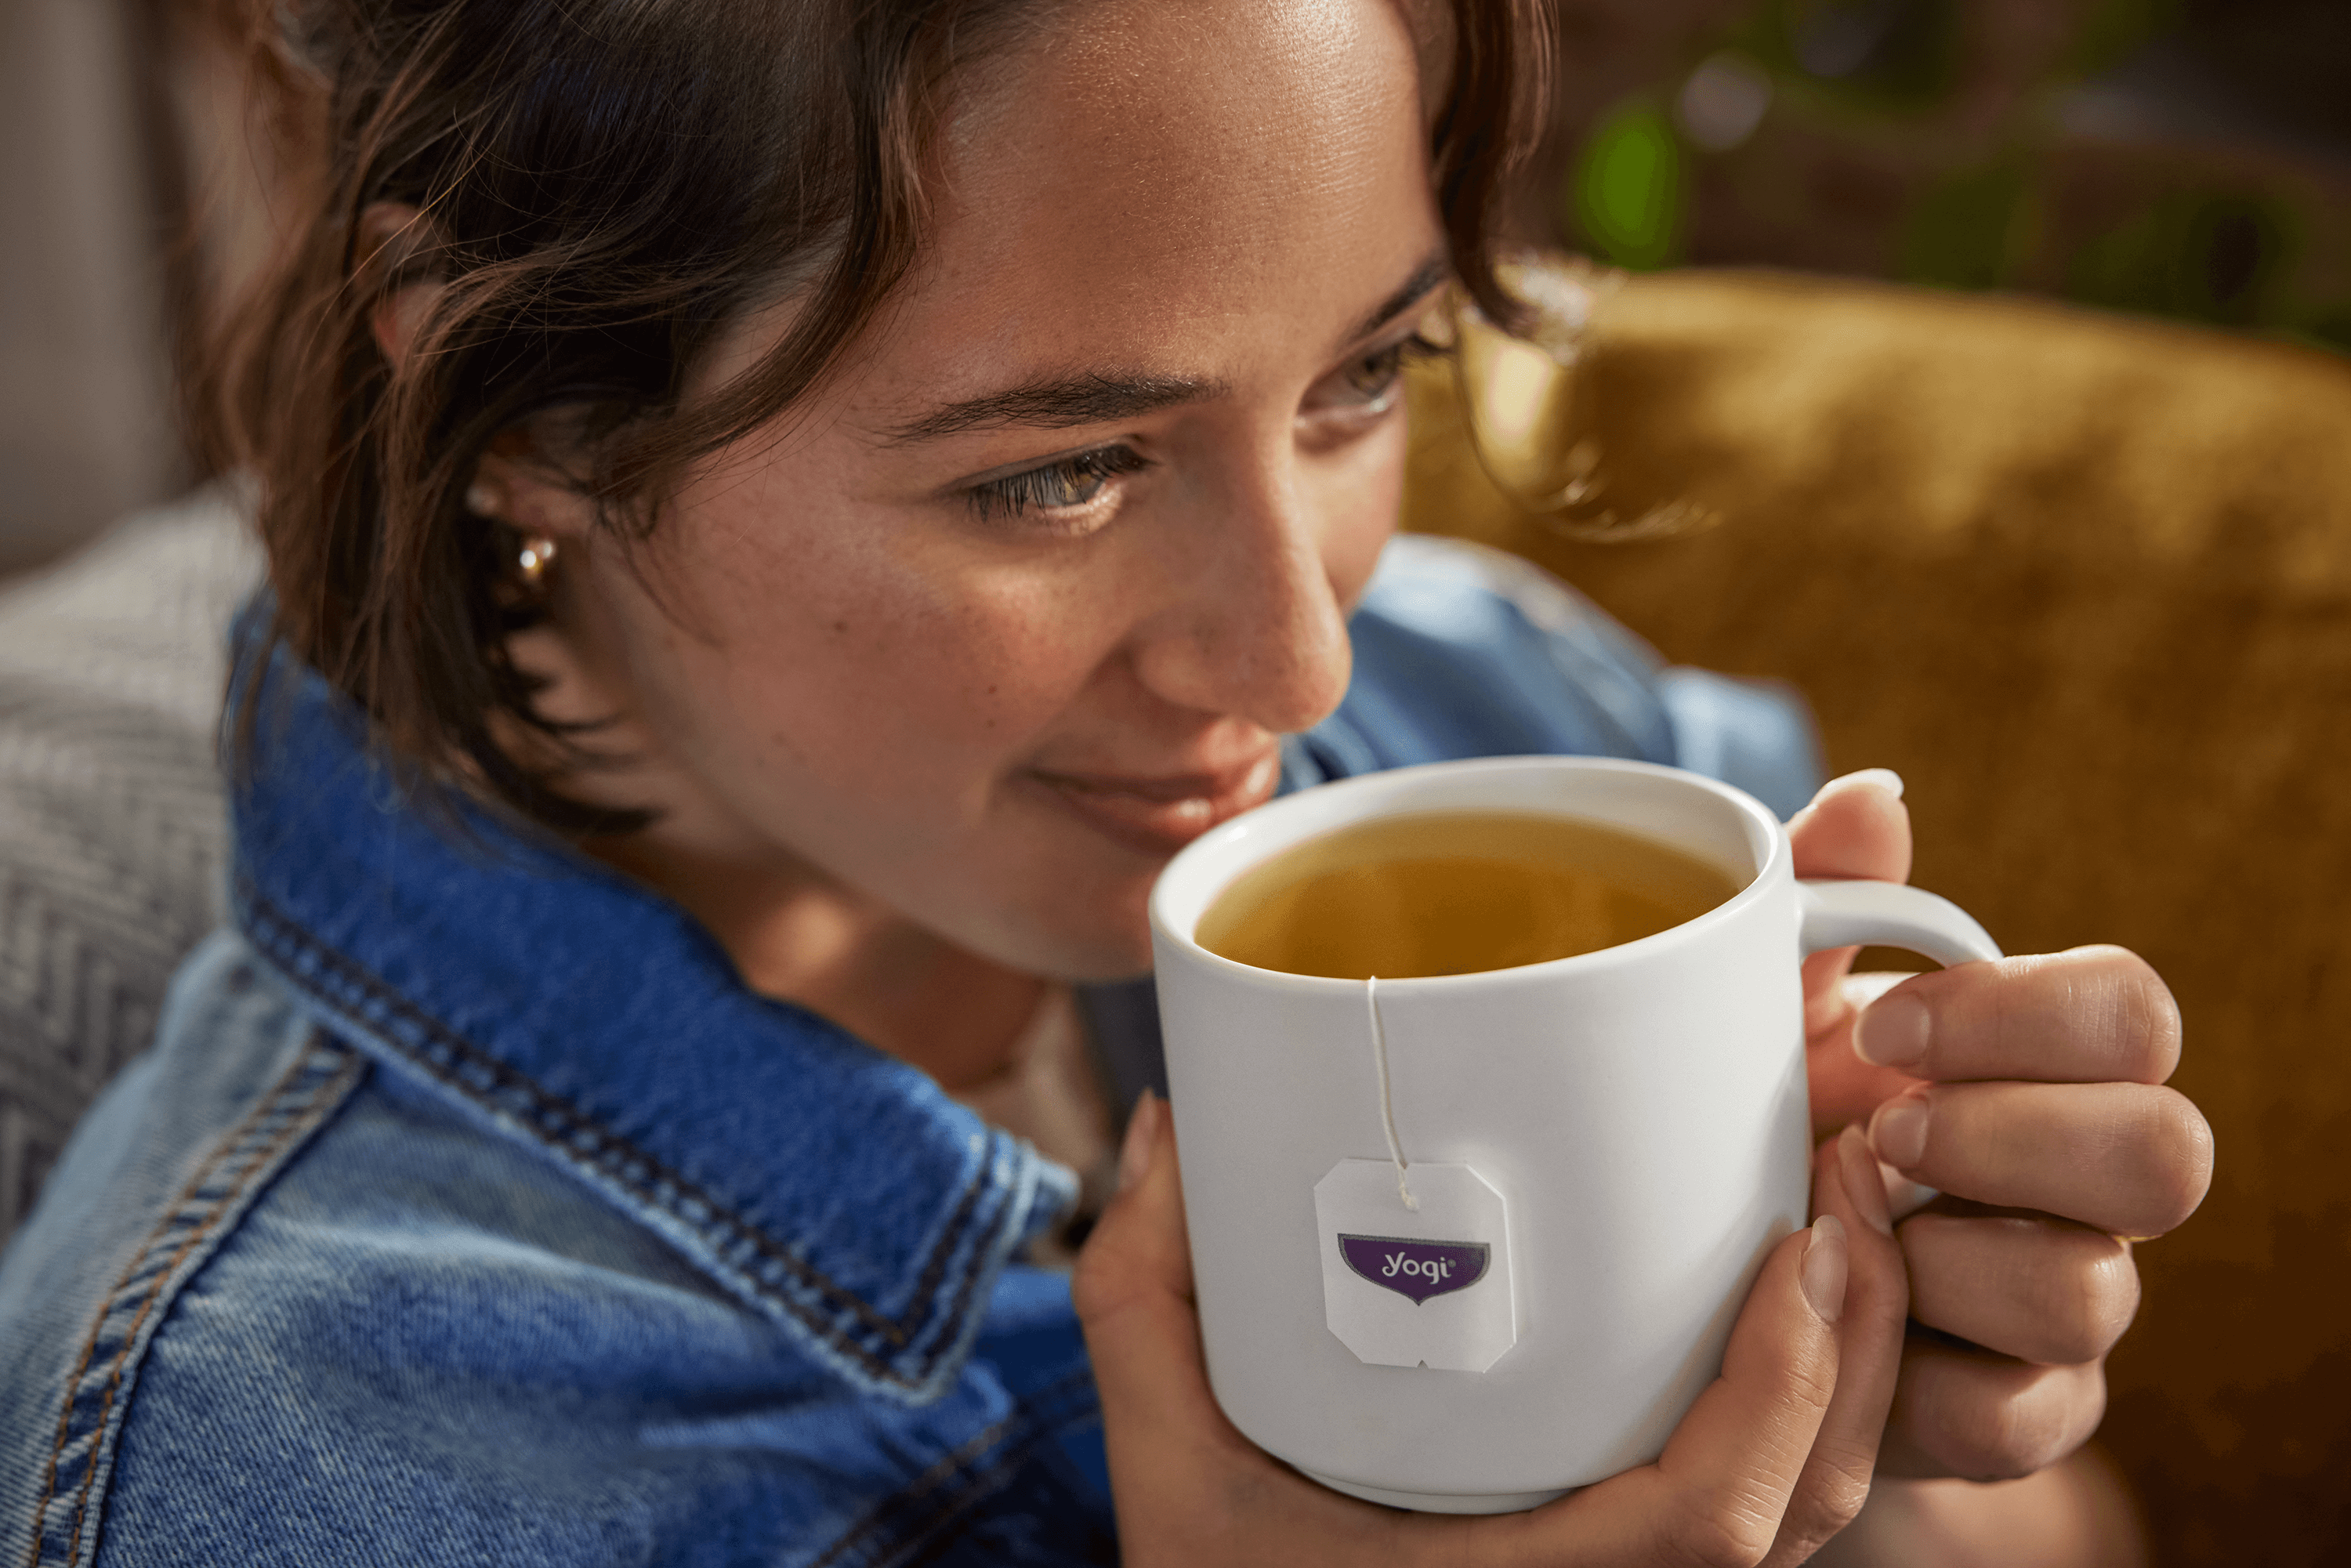 Woman smiling and drinking a cup of Yogi Tea